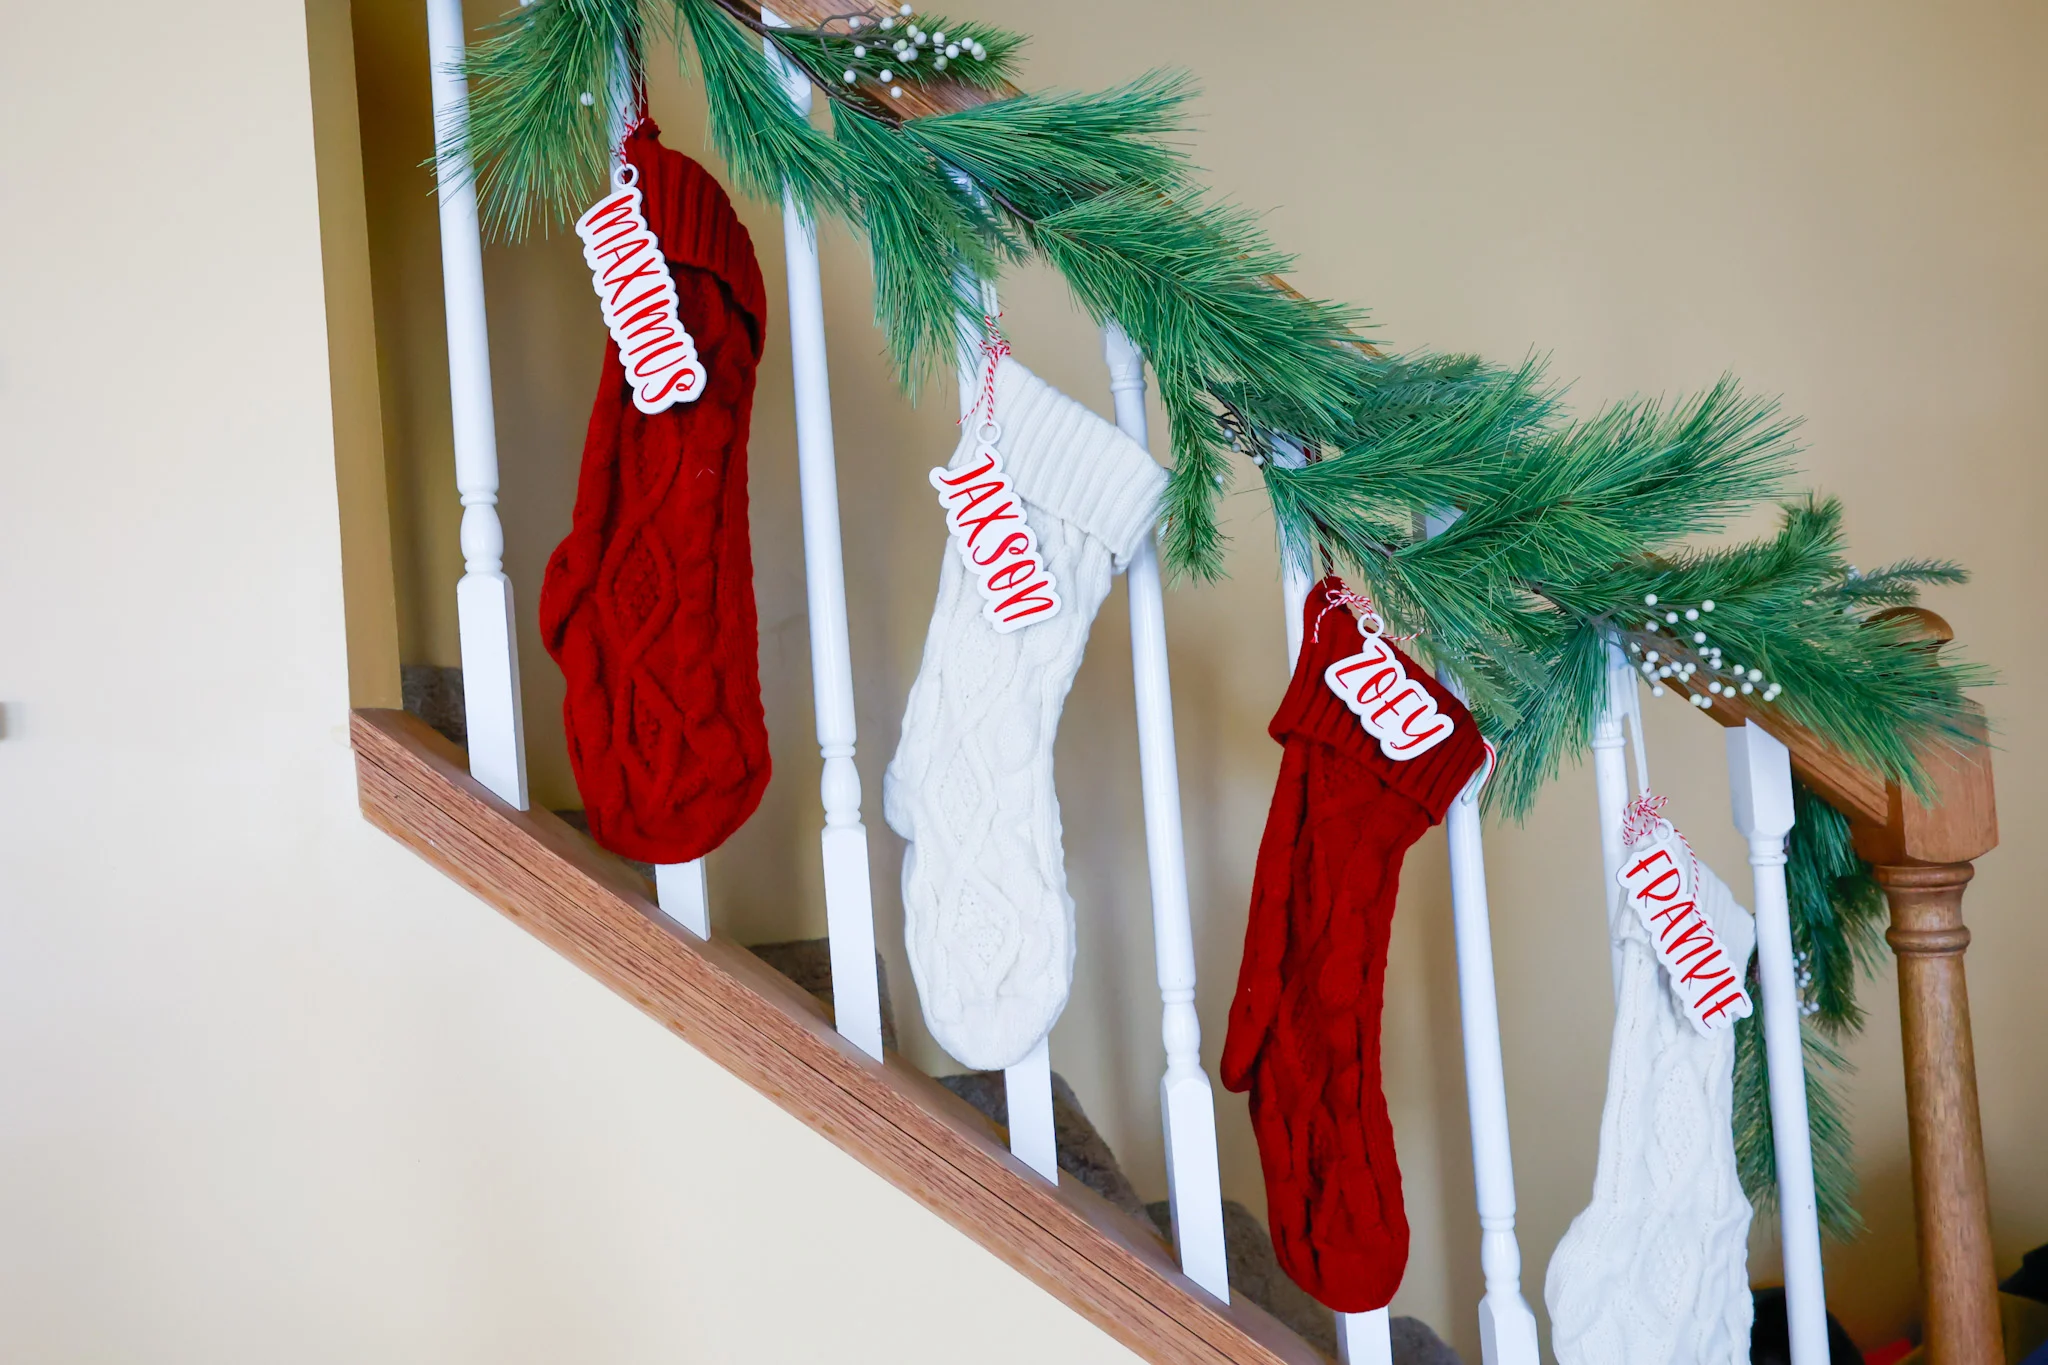 Personalize Your Stockings with DIY Tags & Printable Name Labels